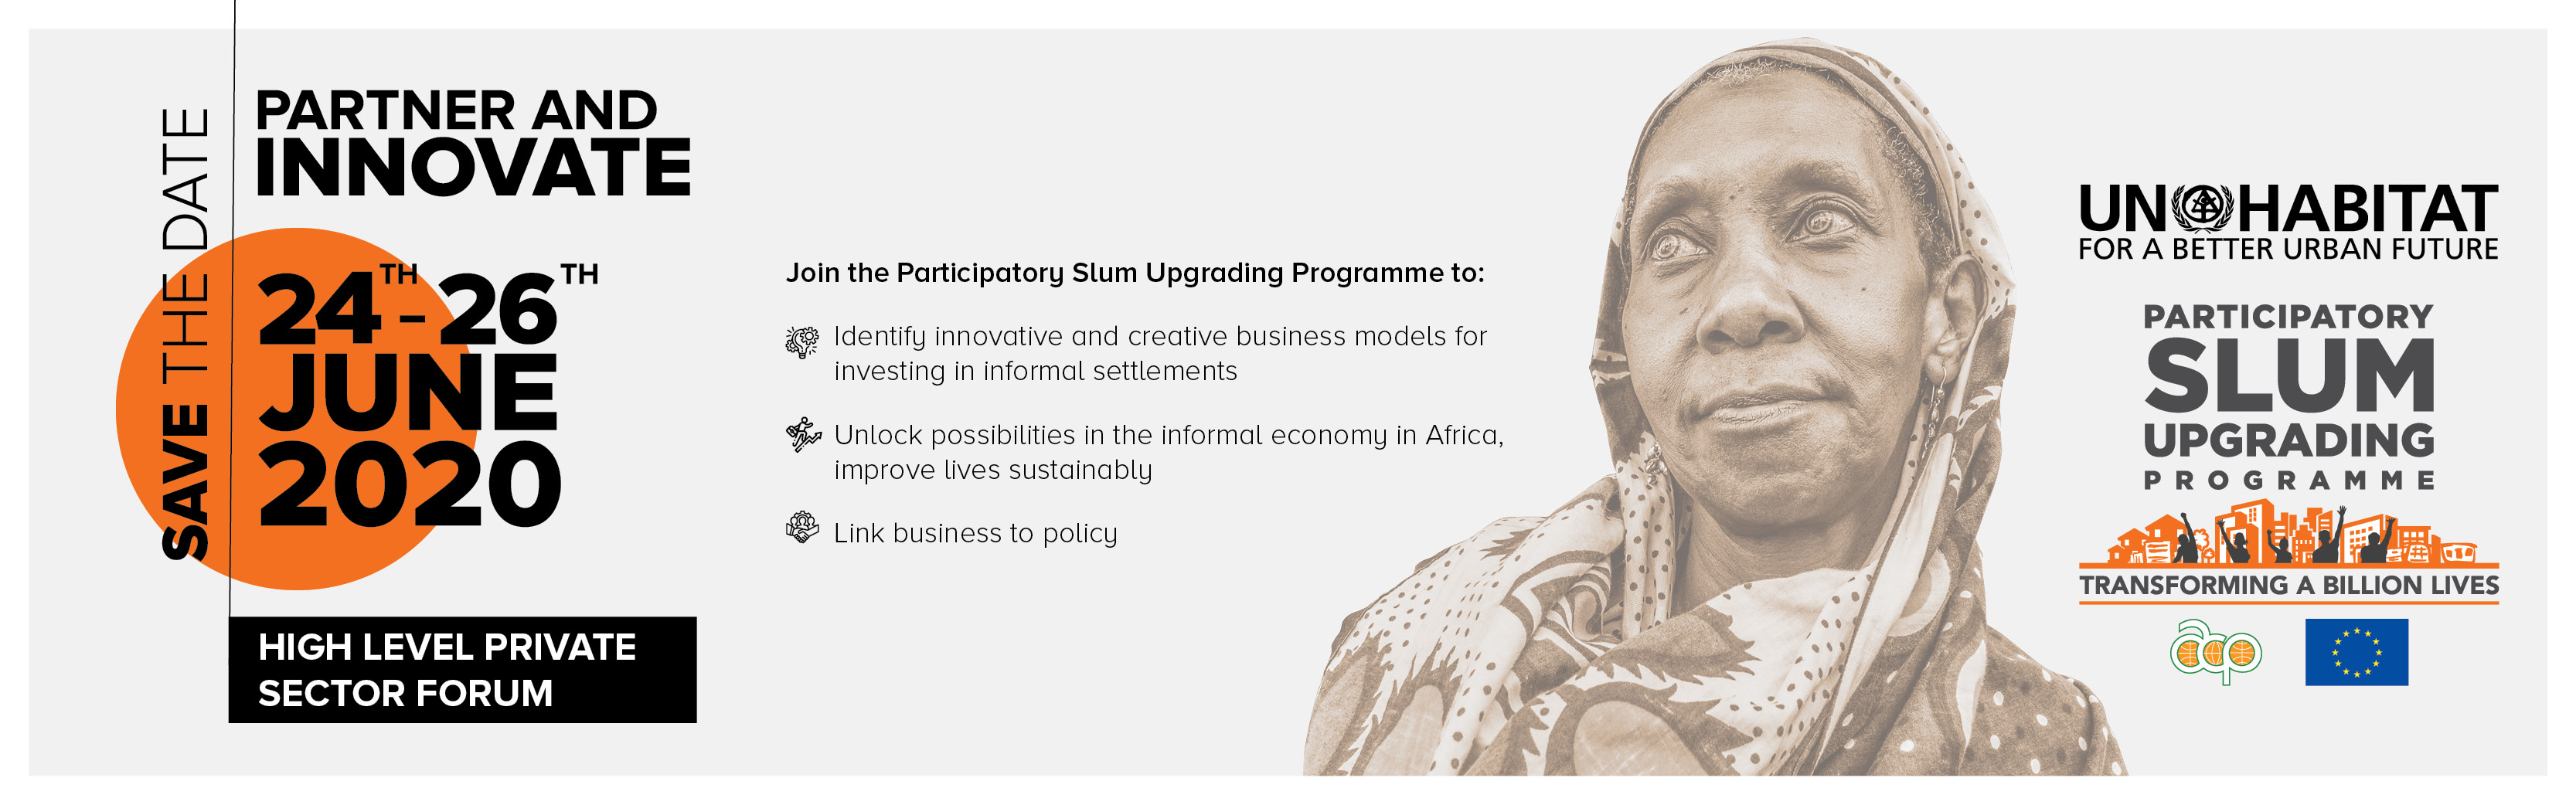 Webinar: Private Sector Partnership Forum Web Conference on June 24 – 26, 2020